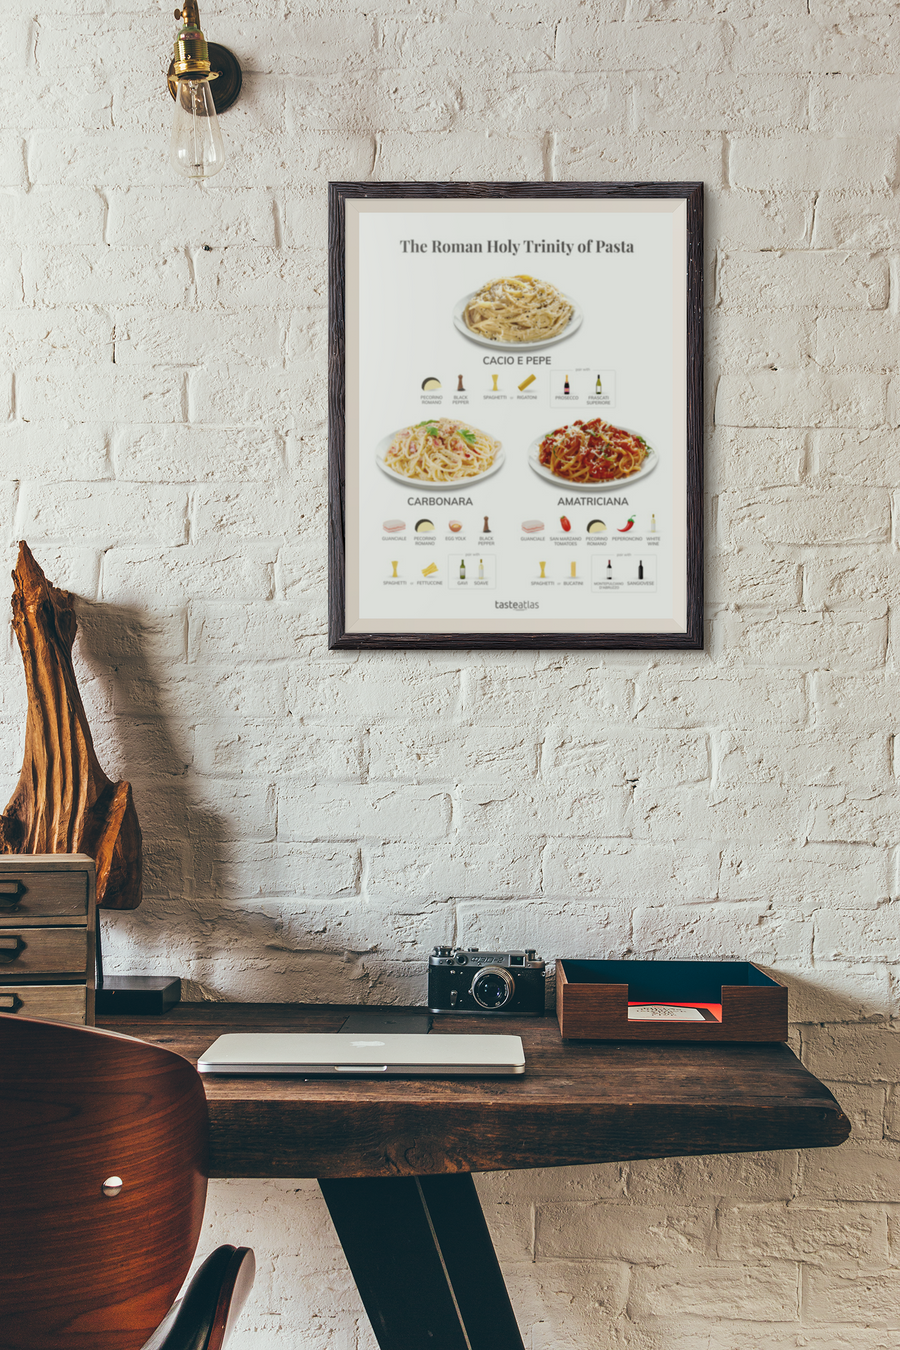 the roman holy trinity of pasta poster above the vintage desk